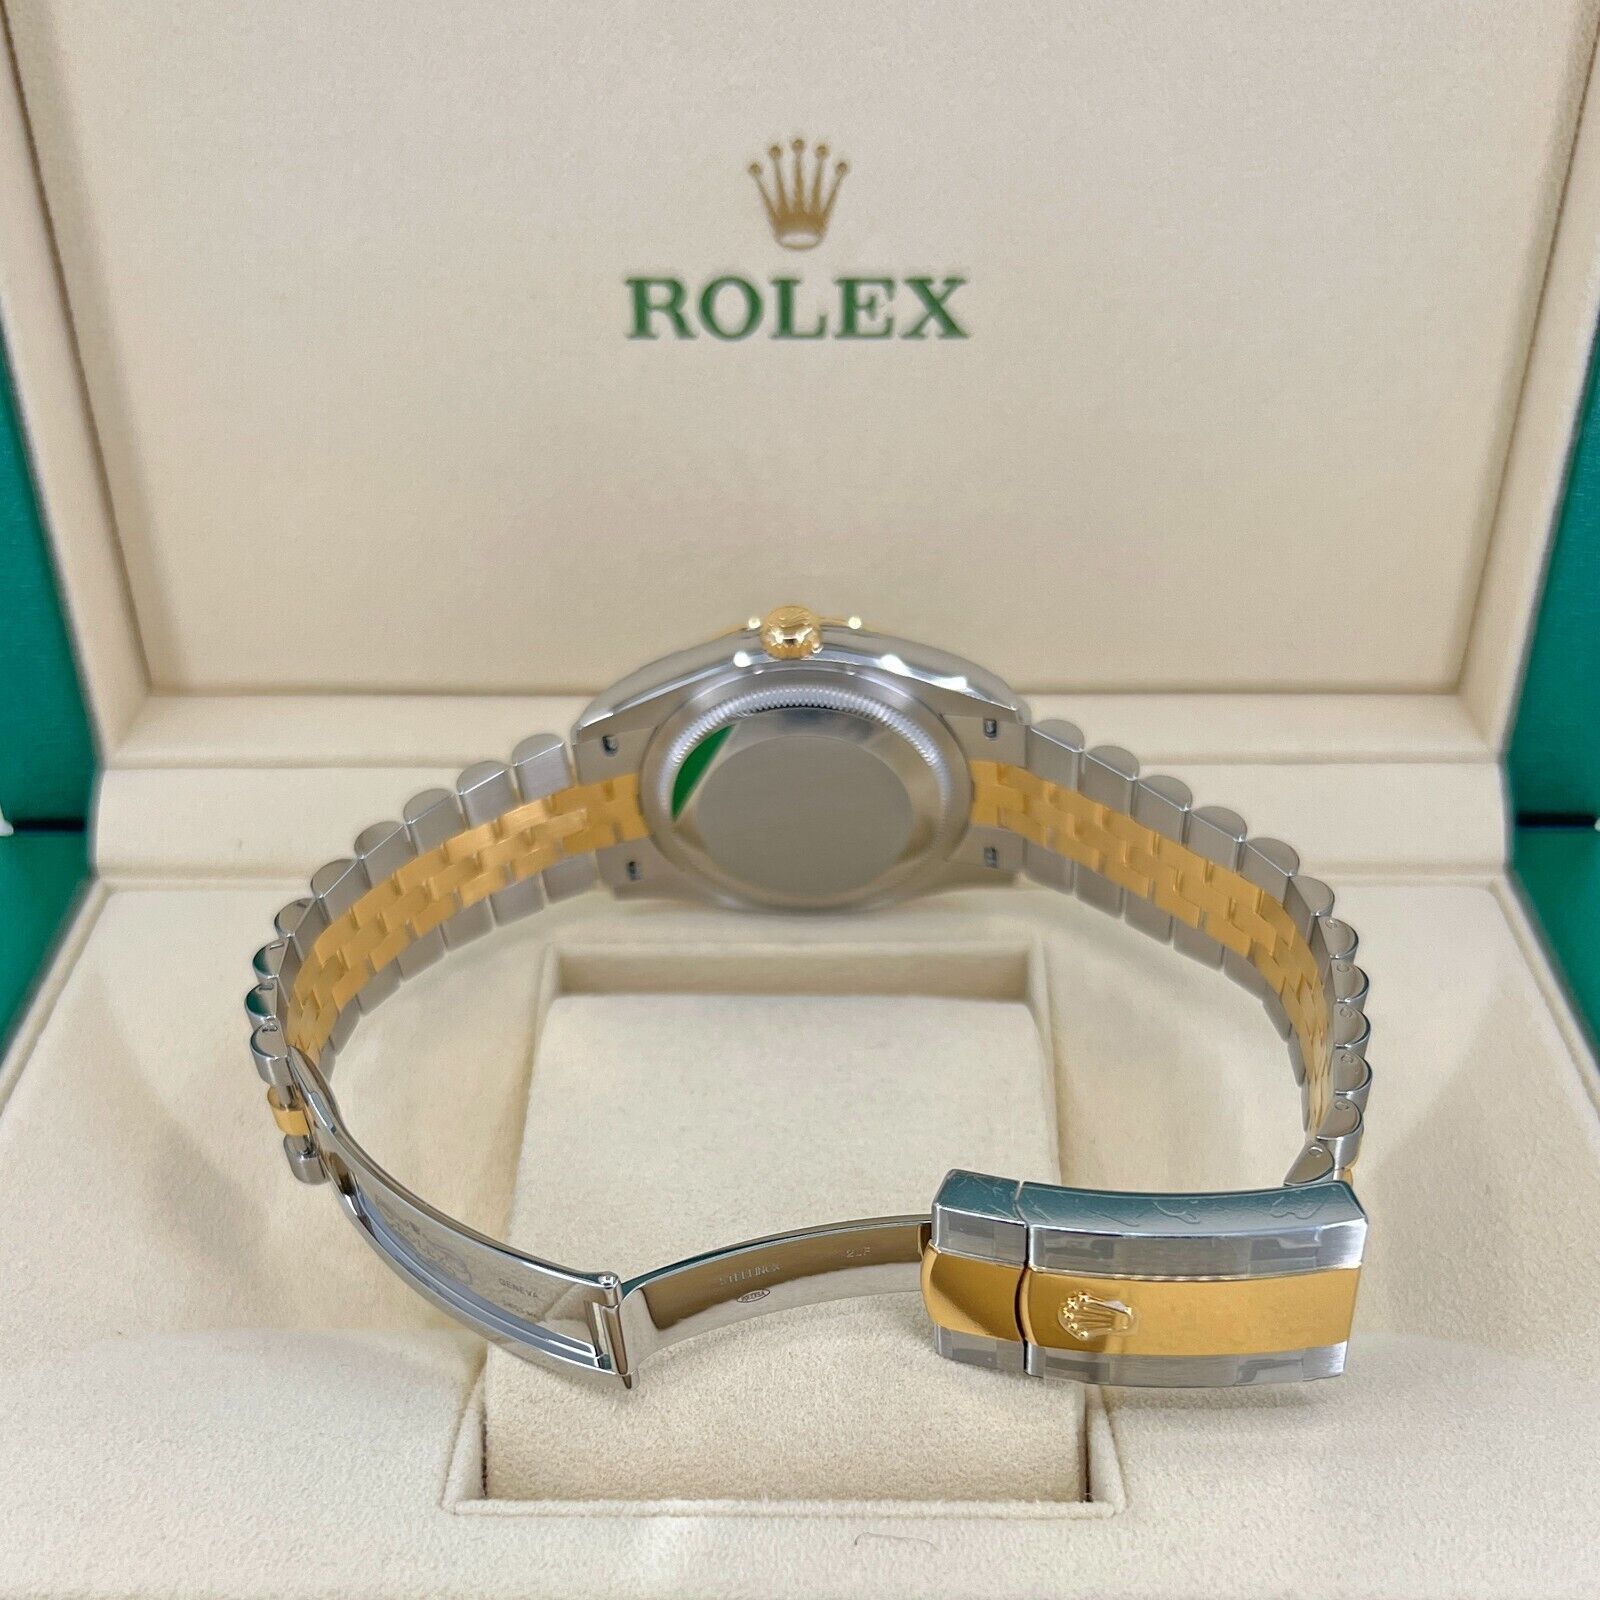 Rolex Datejust 36, 18k Yellow Gold and Stainless Steel, 36mm, Golden, palm motif dial, Ref# 126233-0037, Back 1